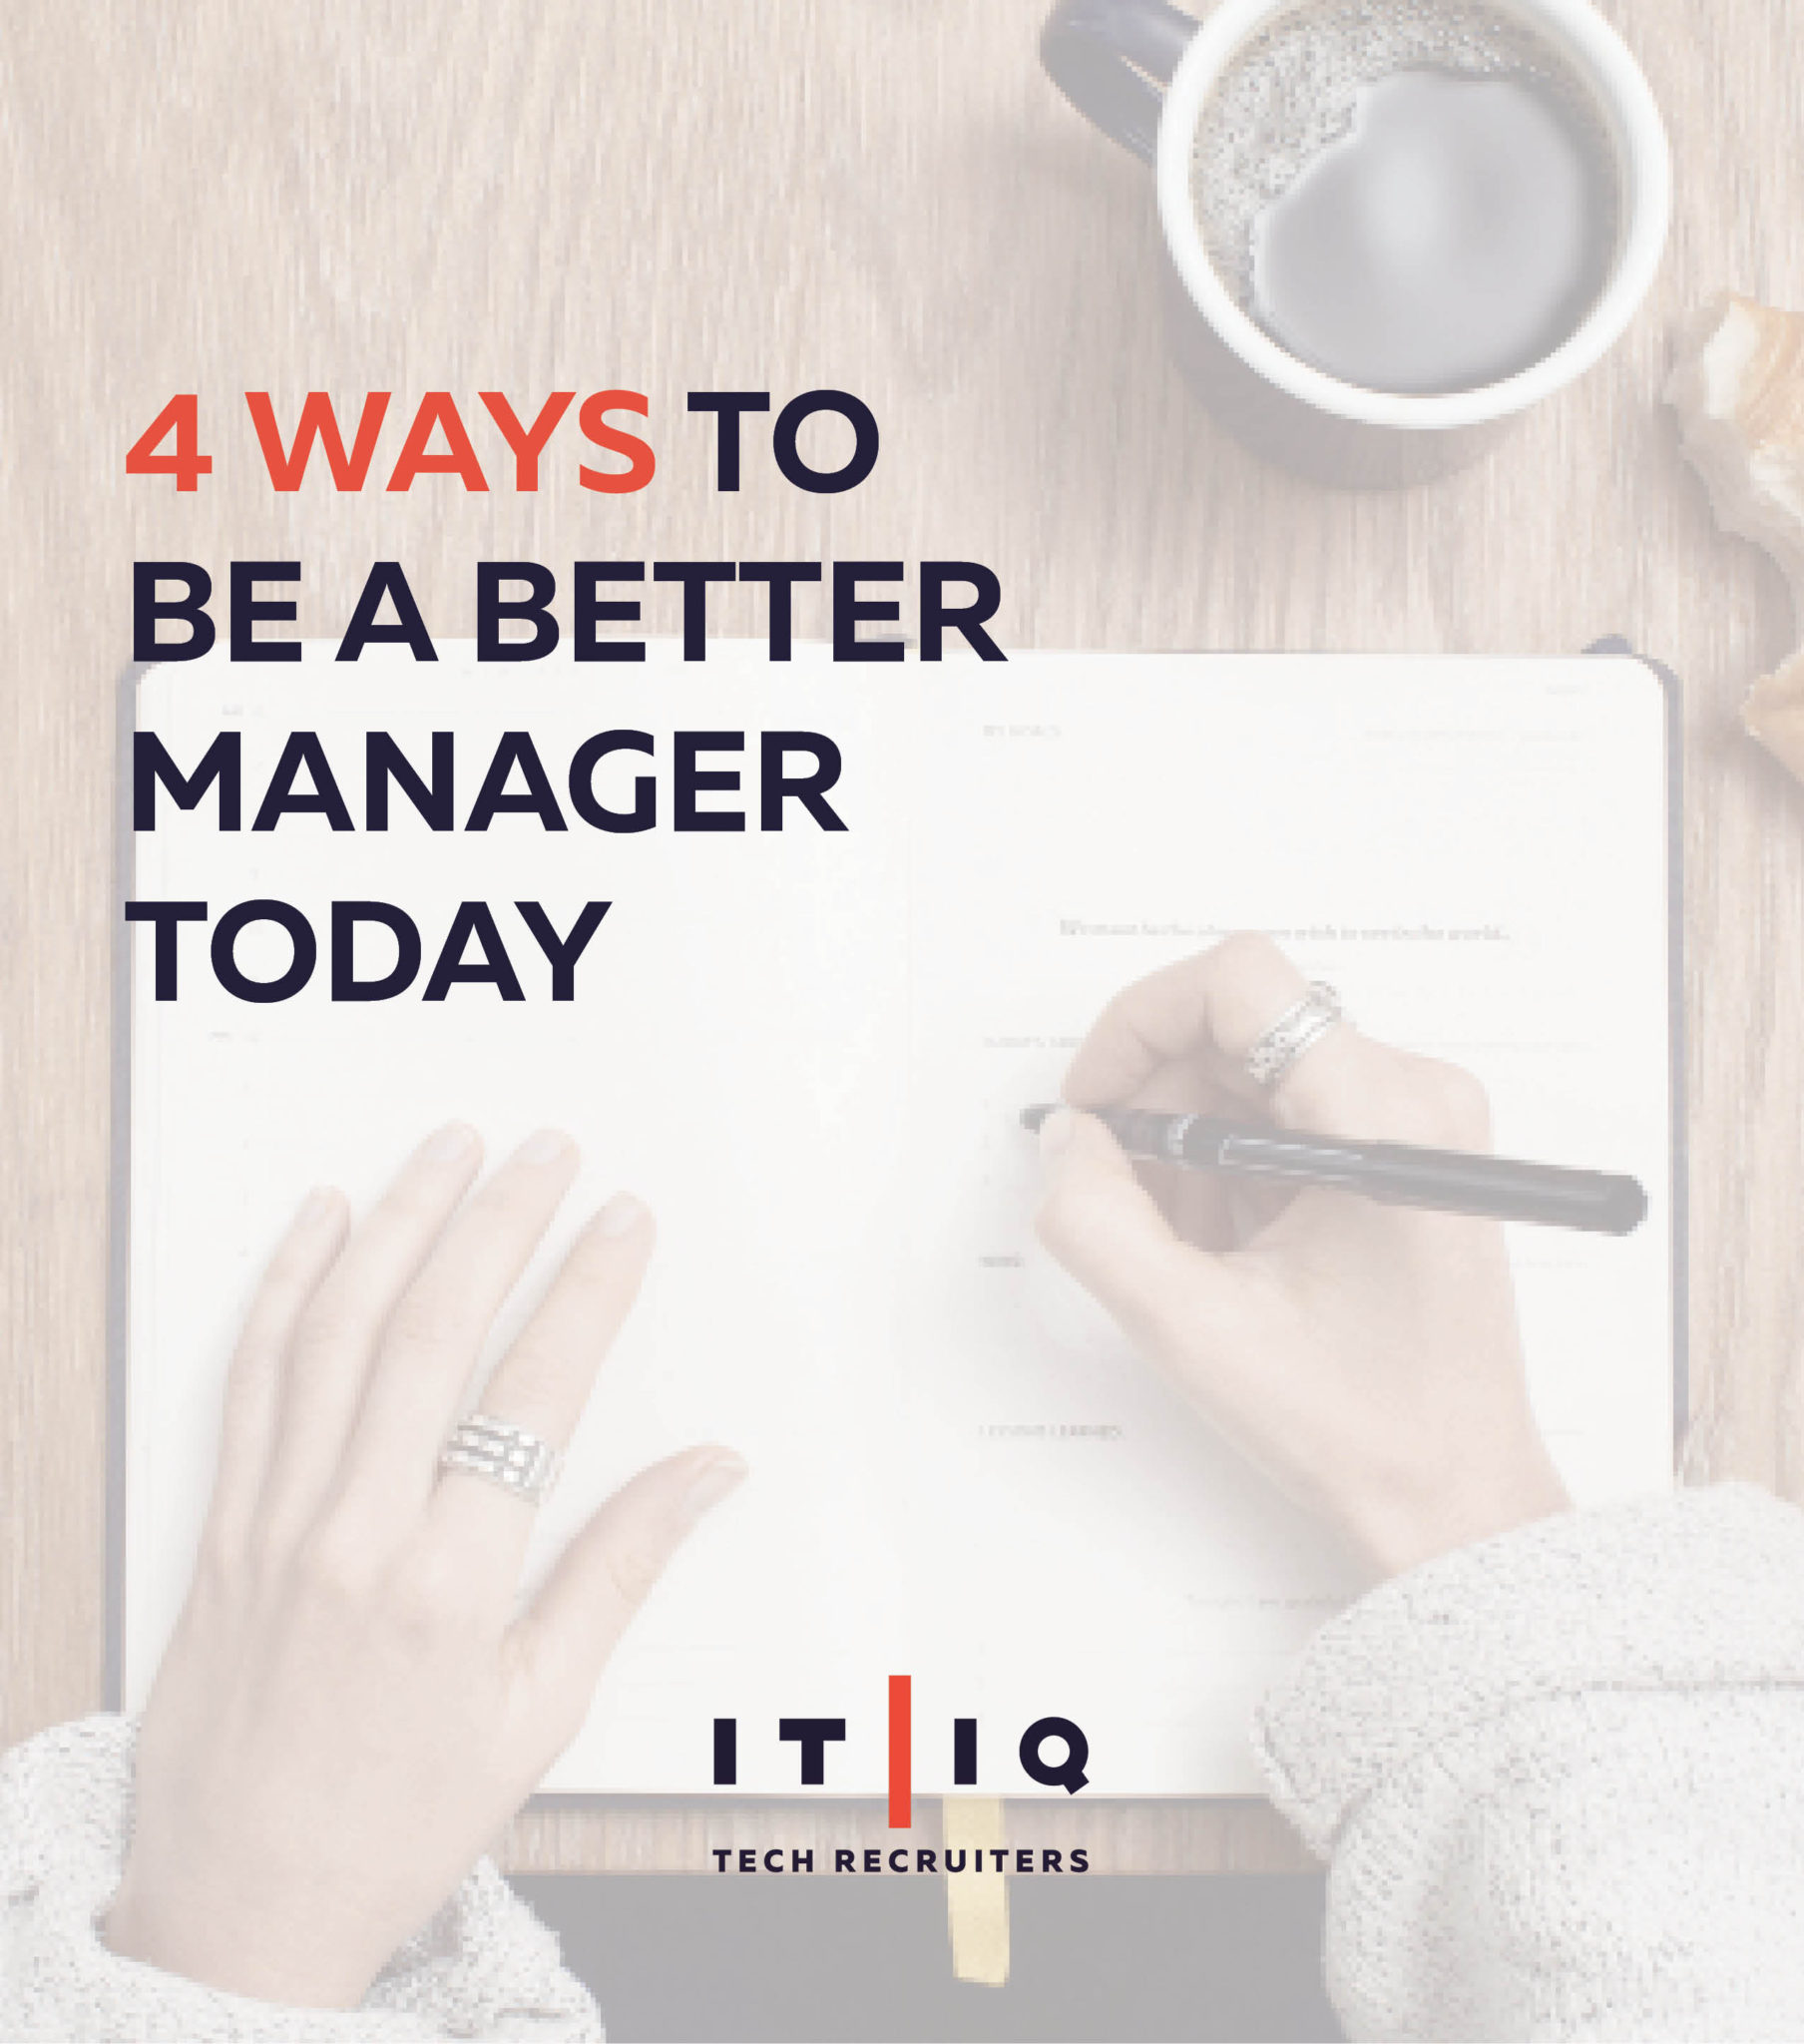 IT/IQ Tech Recruiter " 4 ways to be a better manager today " graphic